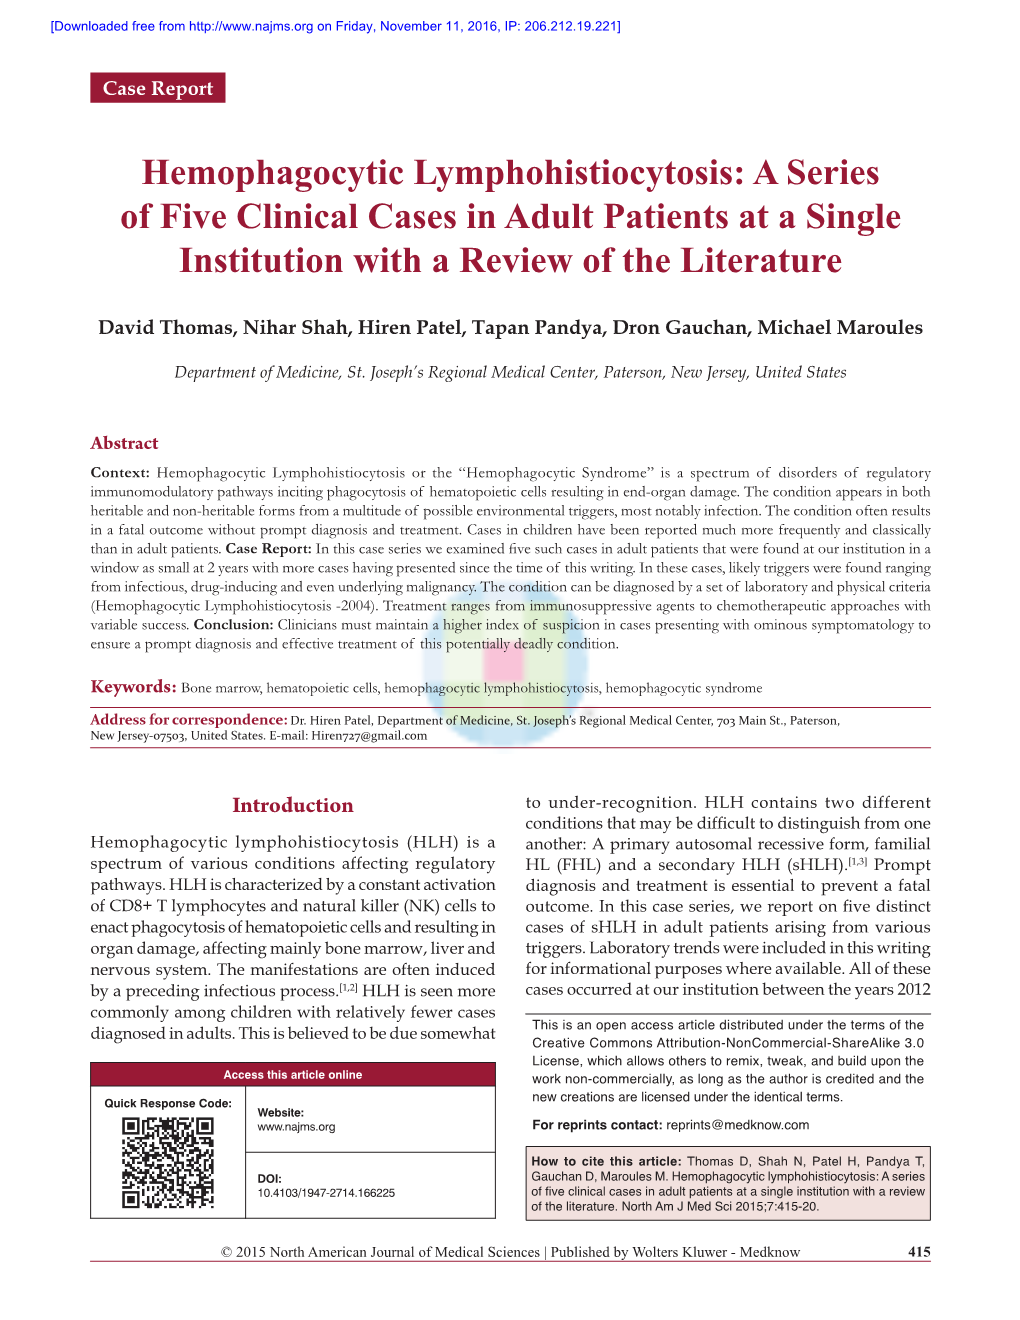 Hemophagocytic Lymphohistiocytosis: a Series of Five Clinical Cases in Adult Patients at a Single Institution with a Review of the Literature